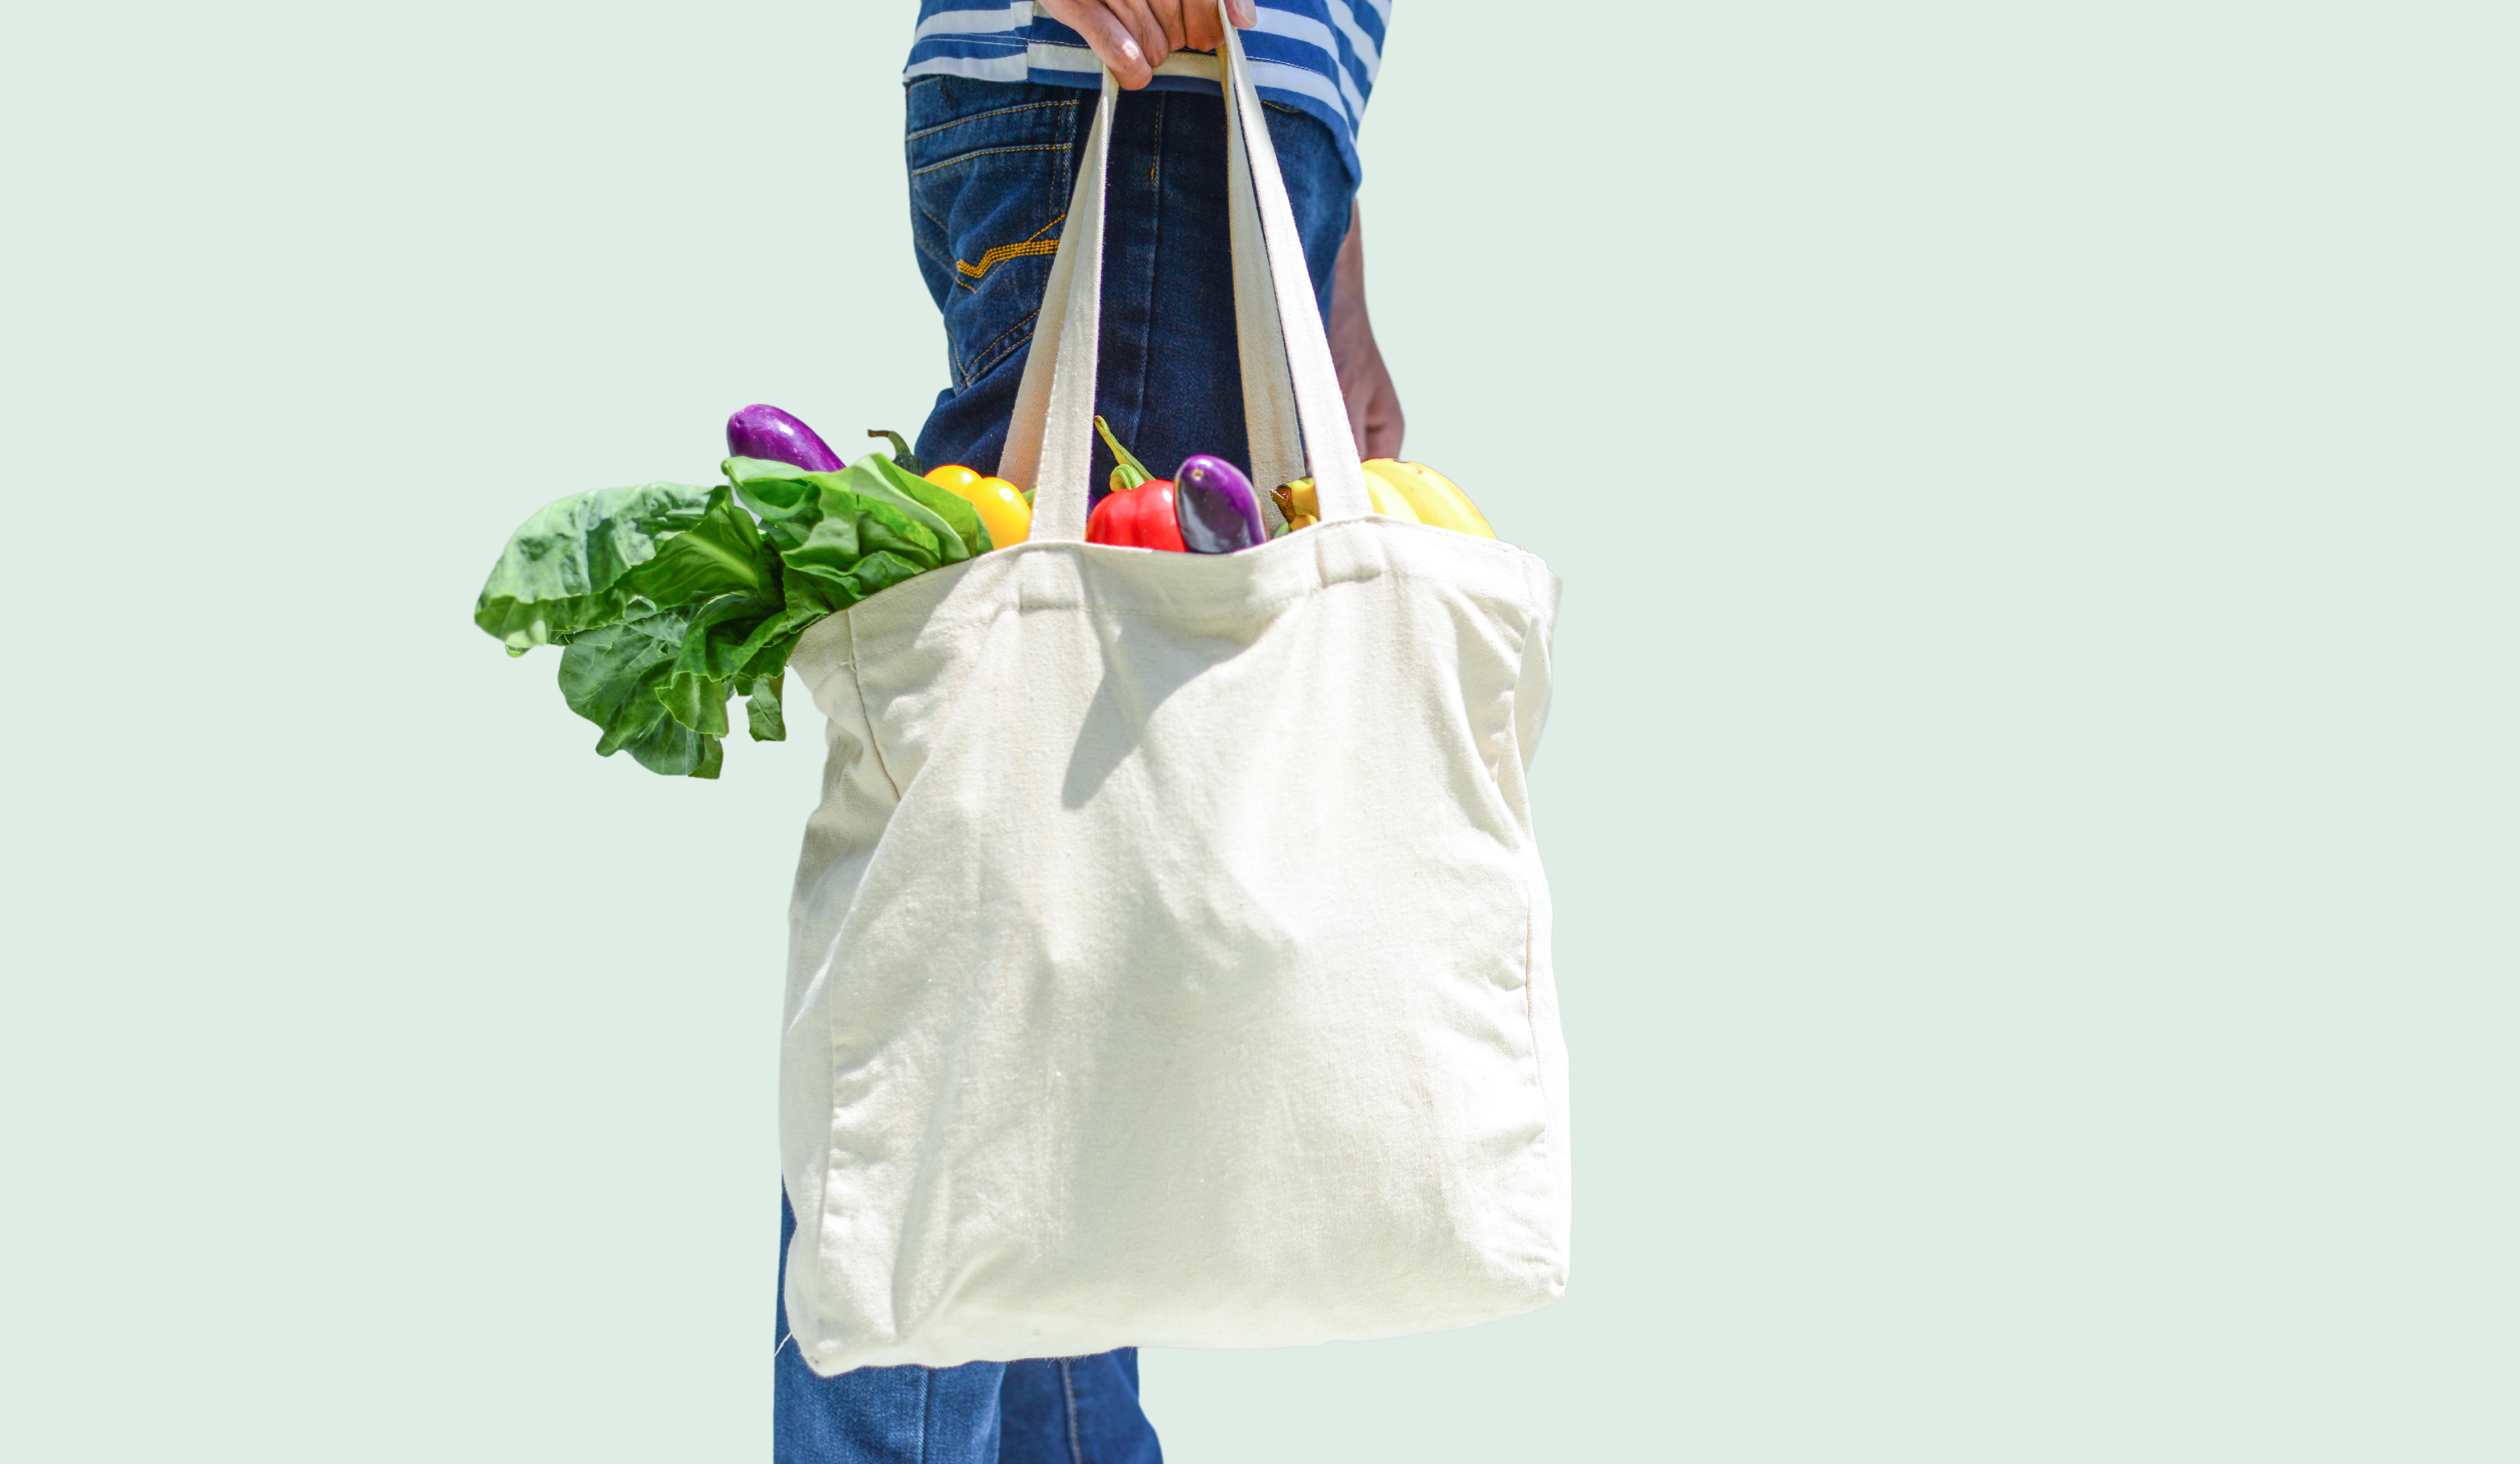 Are Reusable Bags Bad for the Environment?, Eco-Friendly Tote Bags